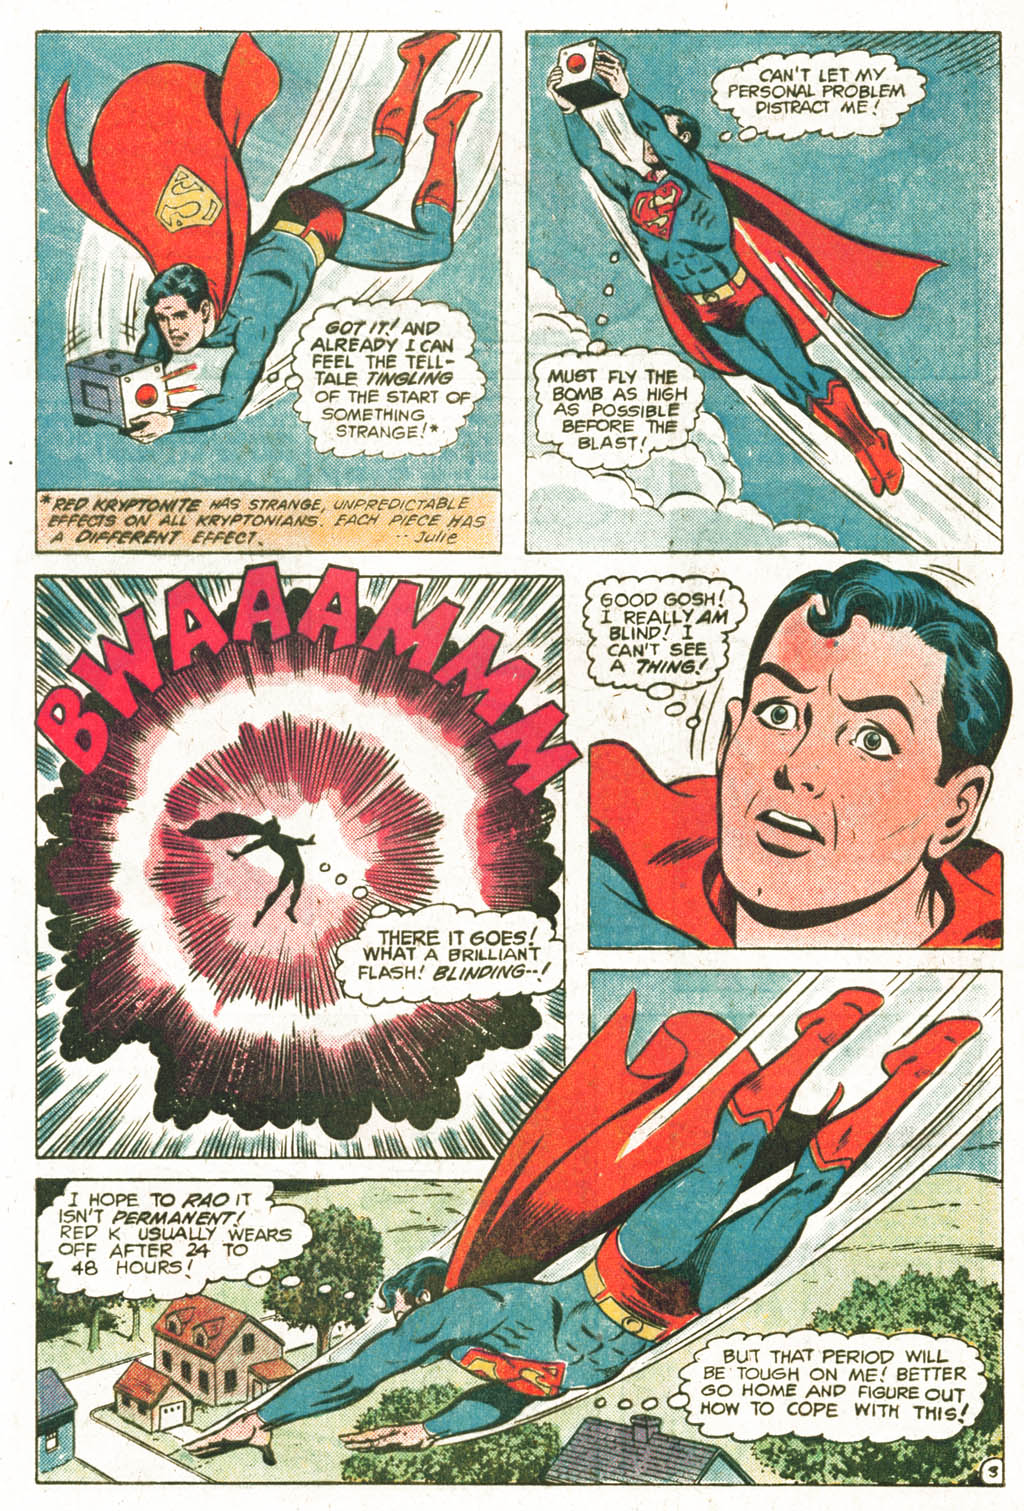 The New Adventures of Superboy 24 Page 3